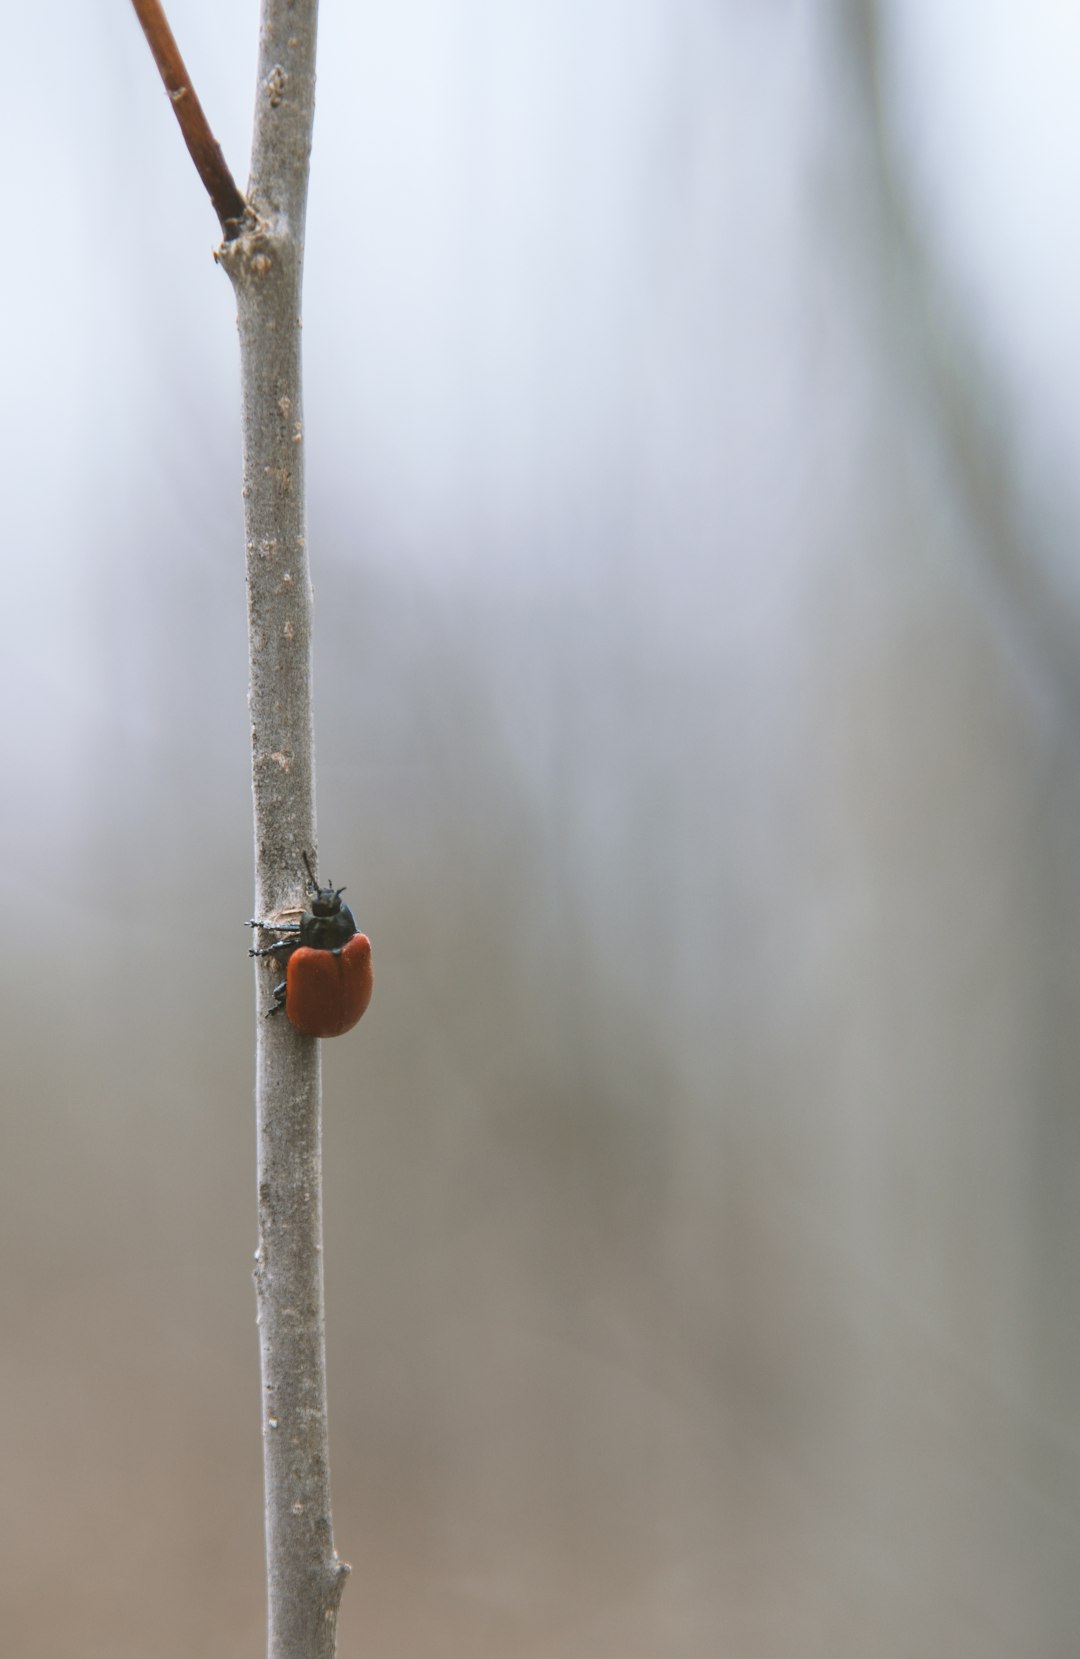 red ladybug perched on gray stick in shallow focus lens